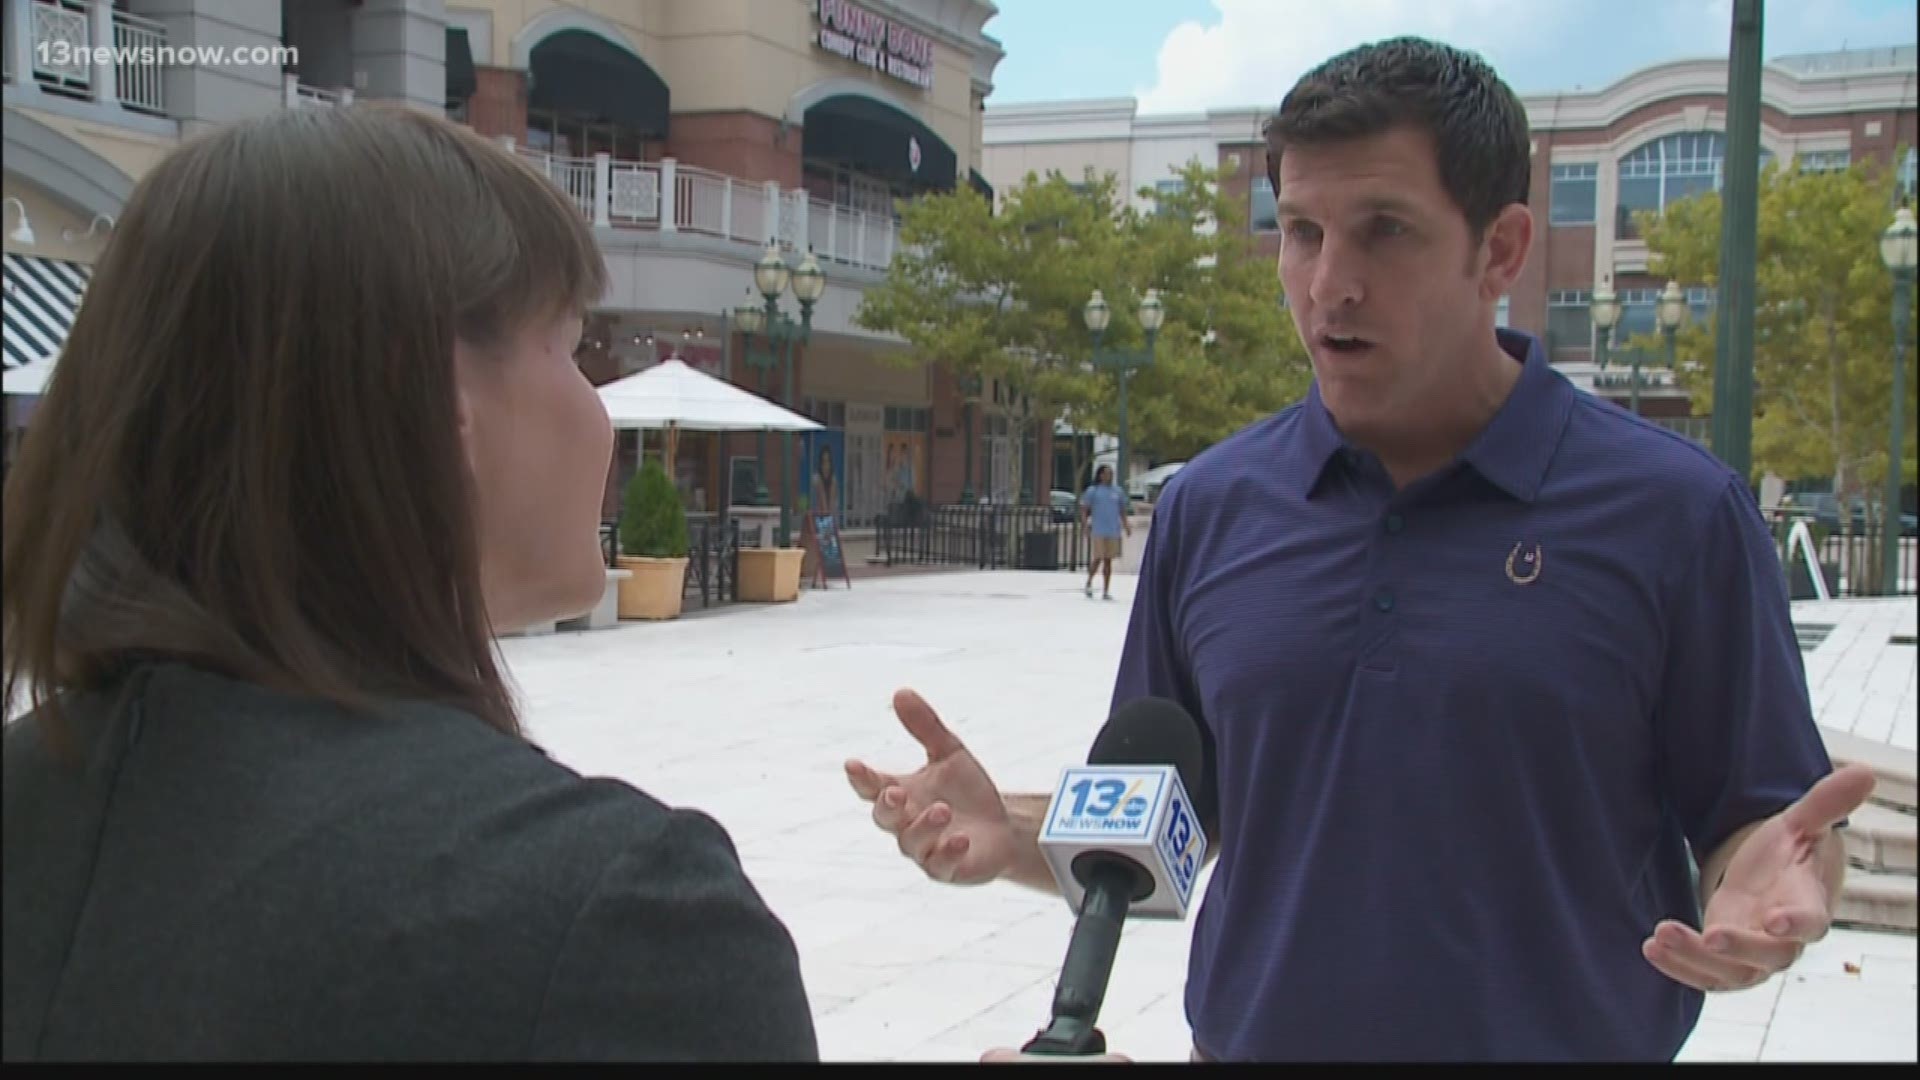 Rep. Scott Taylor is said to be unhappy with WHRO's coverage of an effort by paid Taylor staffers to get independent candidate Shaun Brown on the ballot.